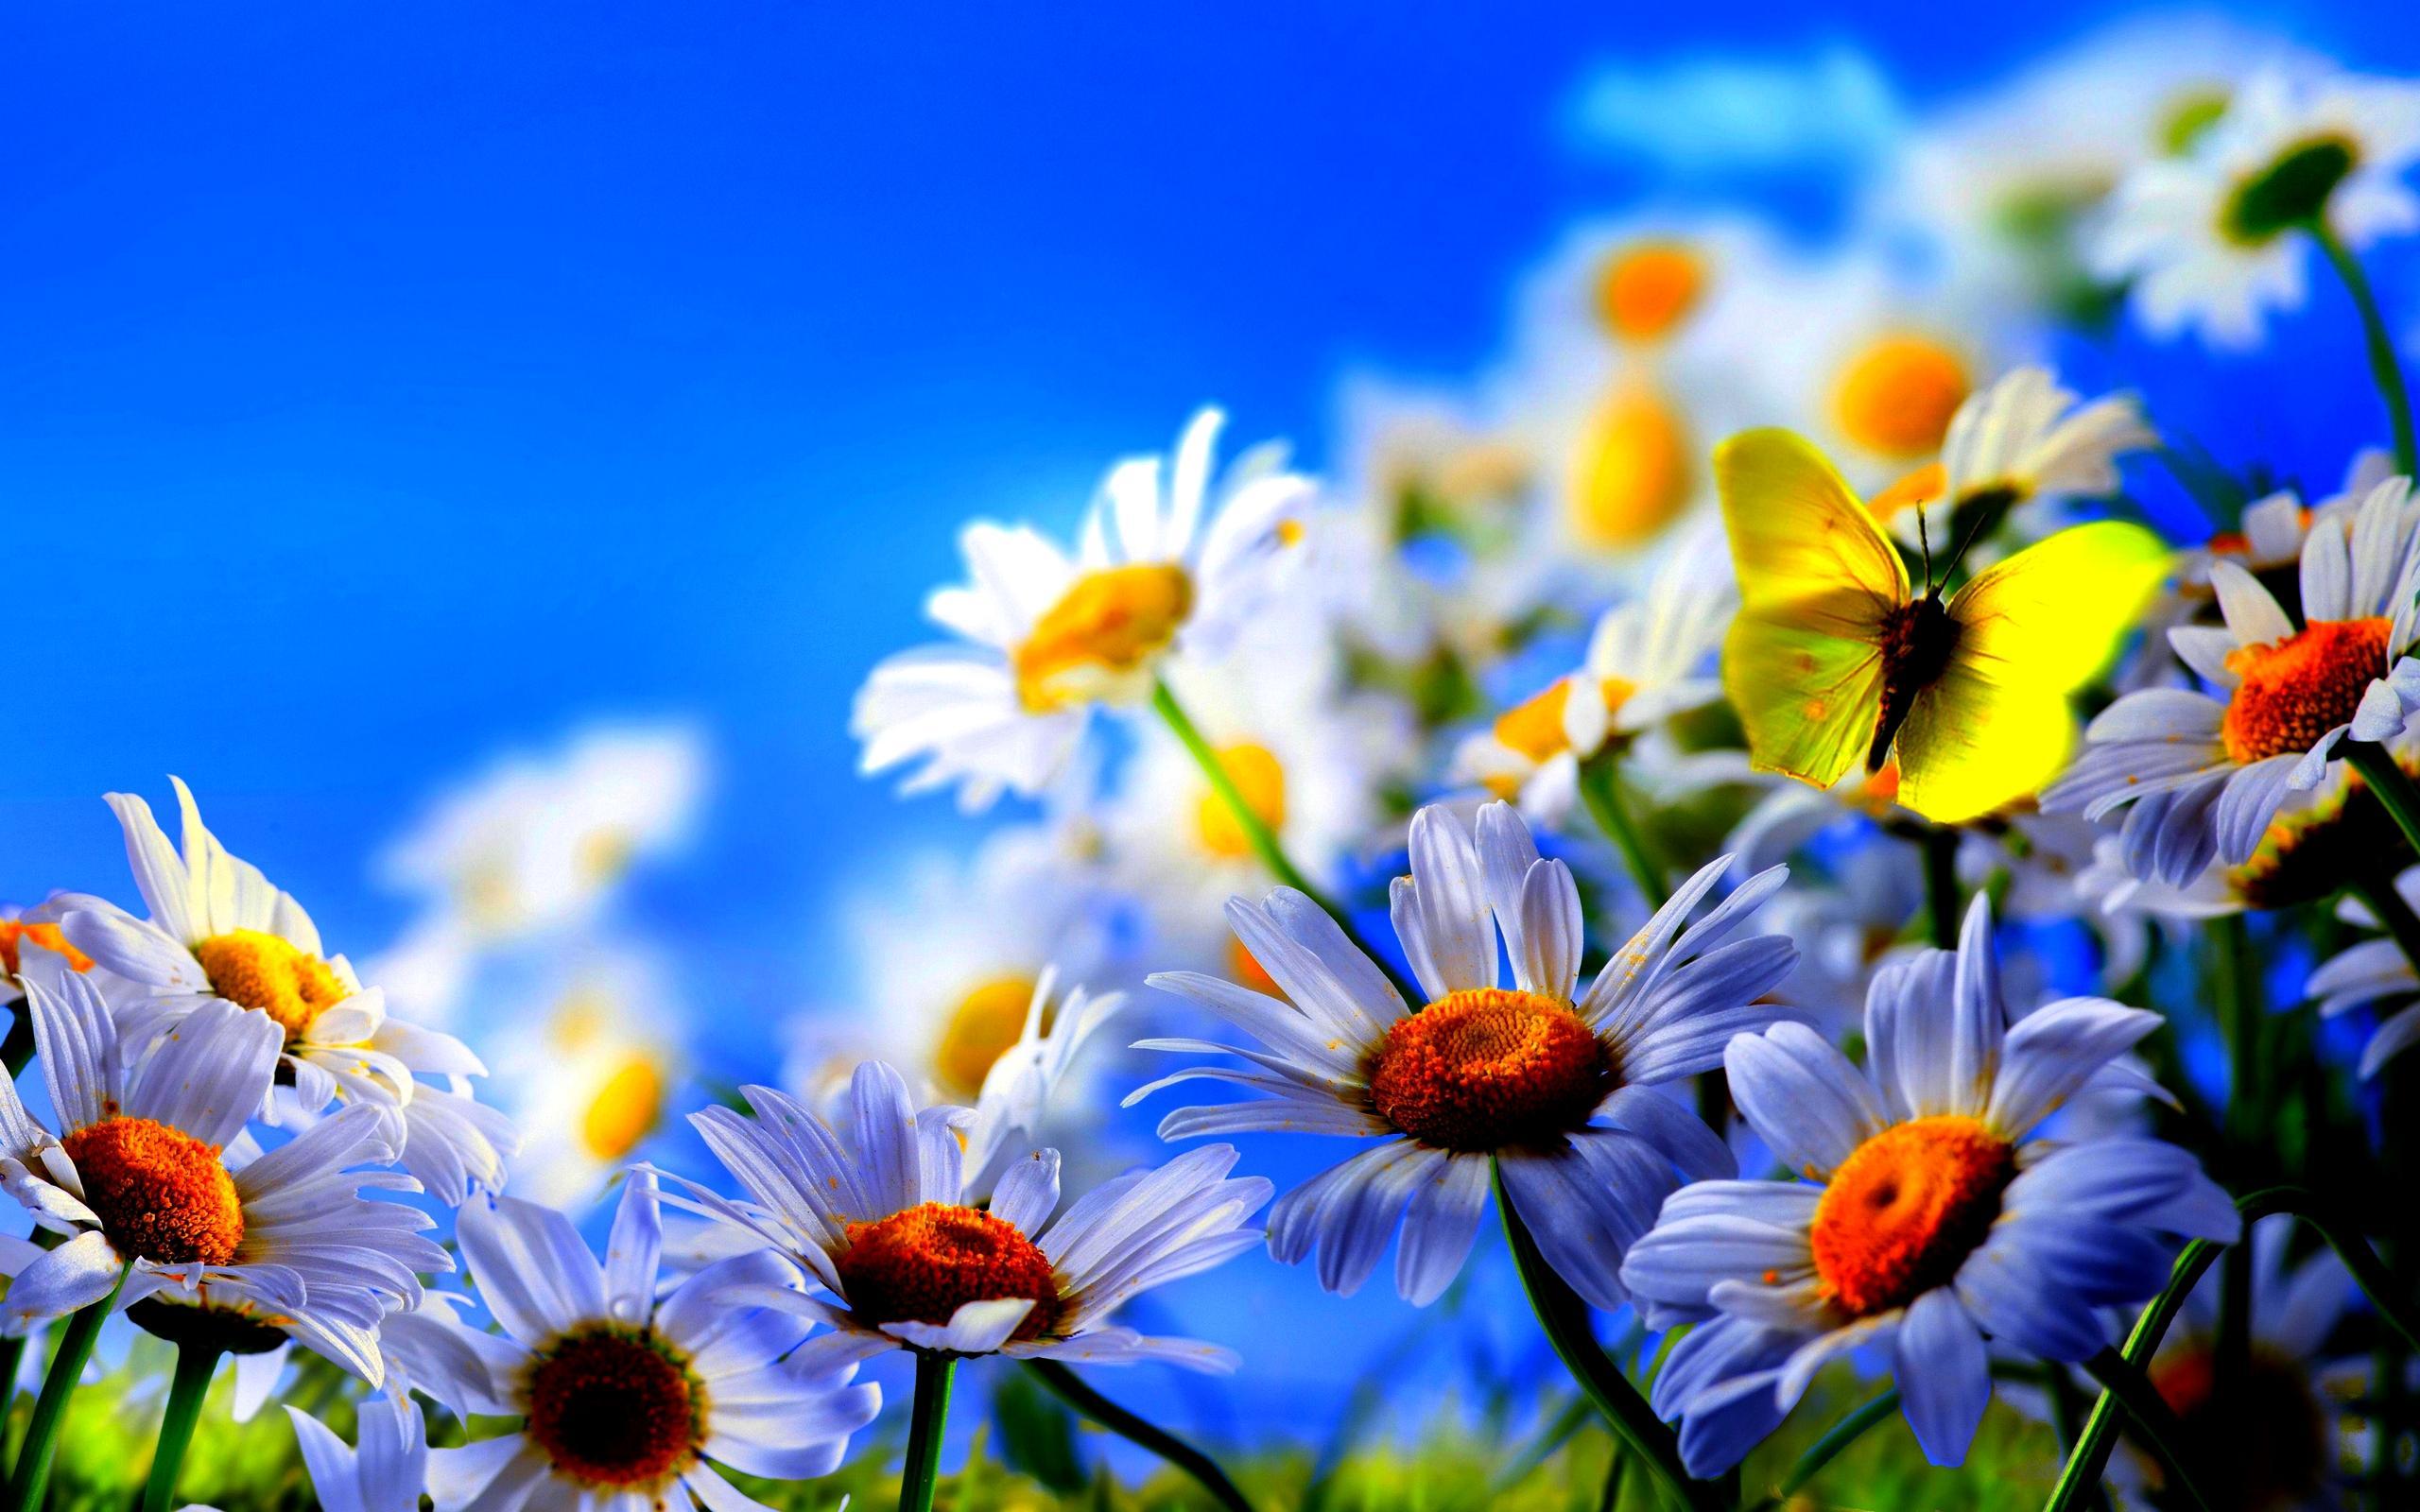 2376.2 Kbyte, v.4.2. full background. Daisies and butterfly